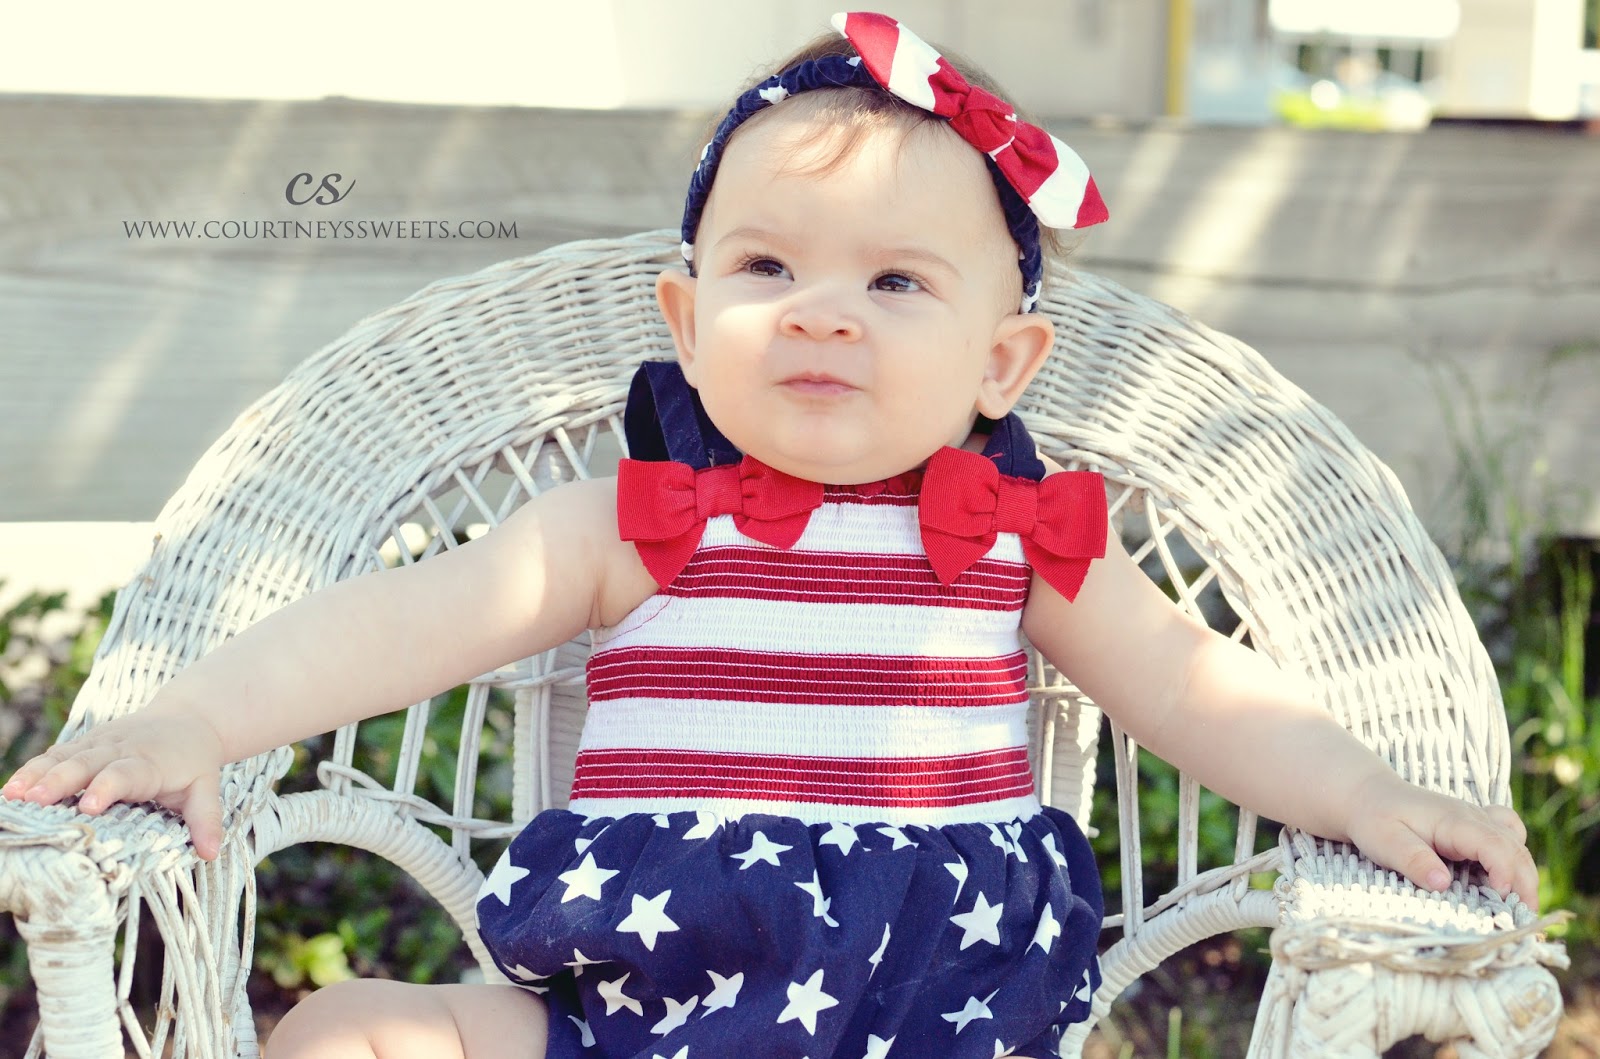 Sweet Baby's First Memorial Day - Courtney's Sweets